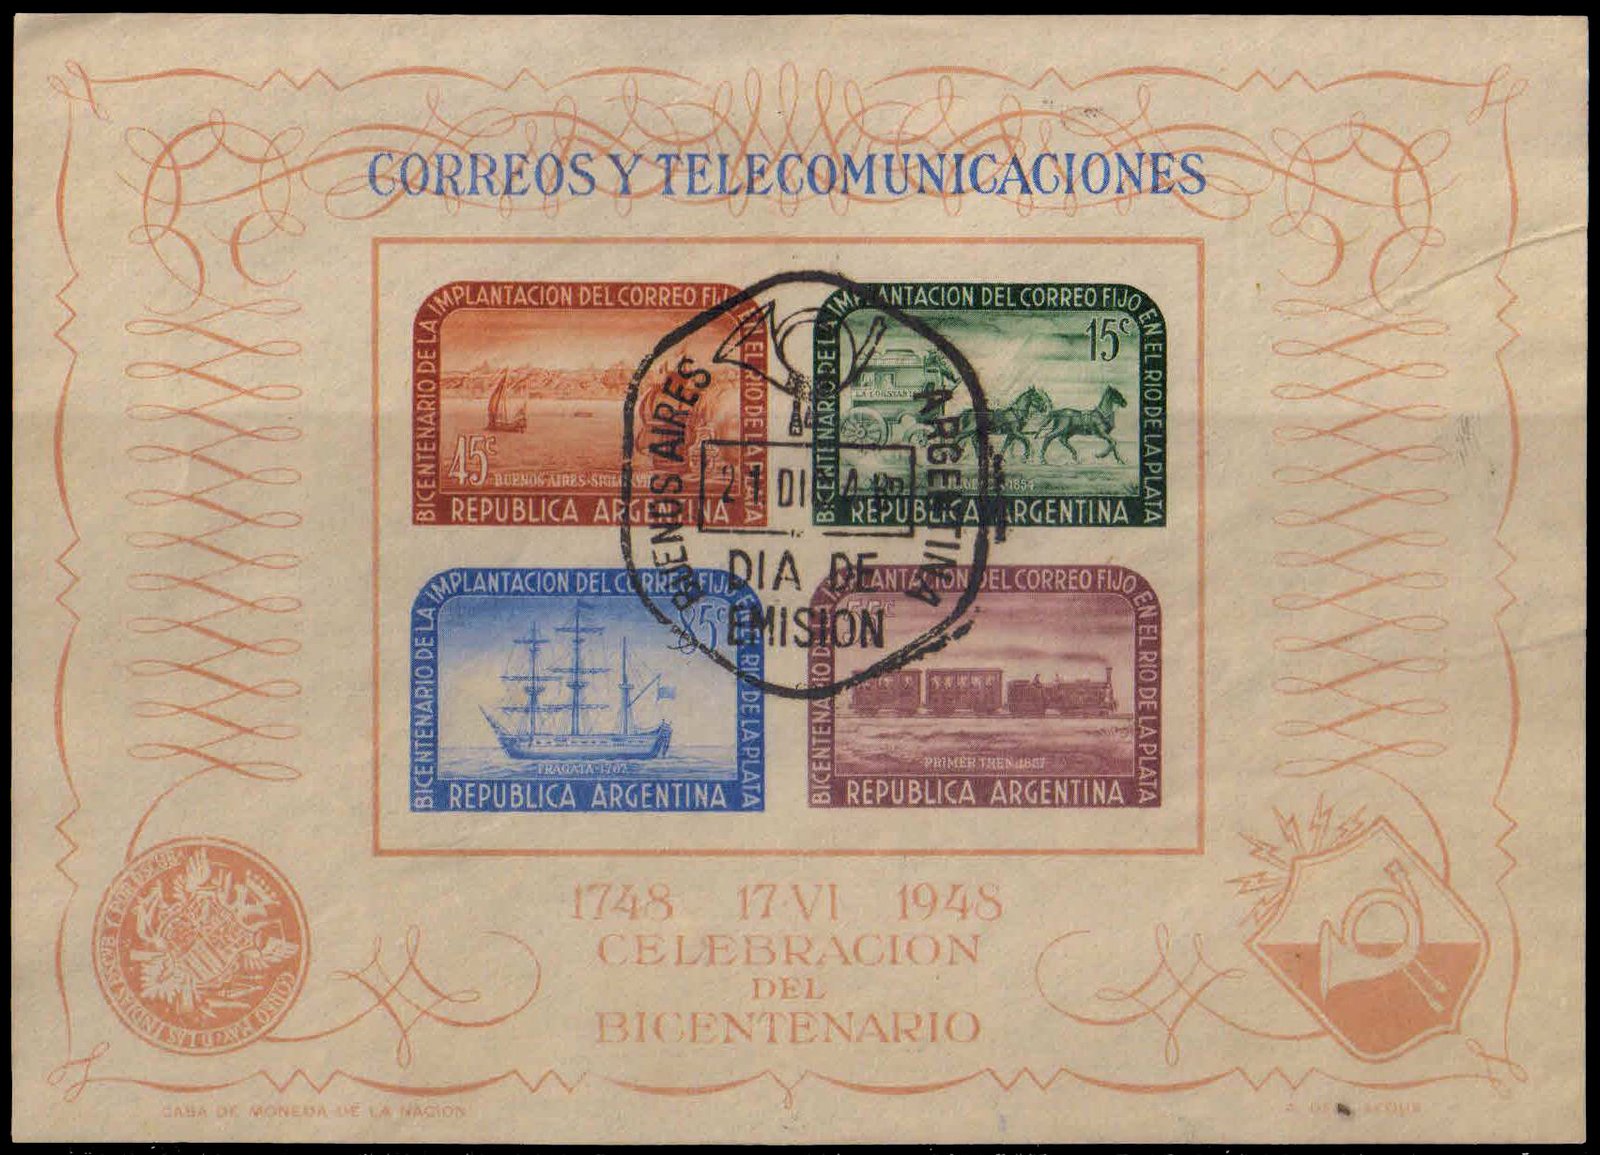 ARGENTINA 1948-Bicent. of Postal Services, Mail Coach, Train, Ship, Miniature Sheet with 1st Day Cancellation, Used, S.G. MS 808a, Cat £ 8.75-